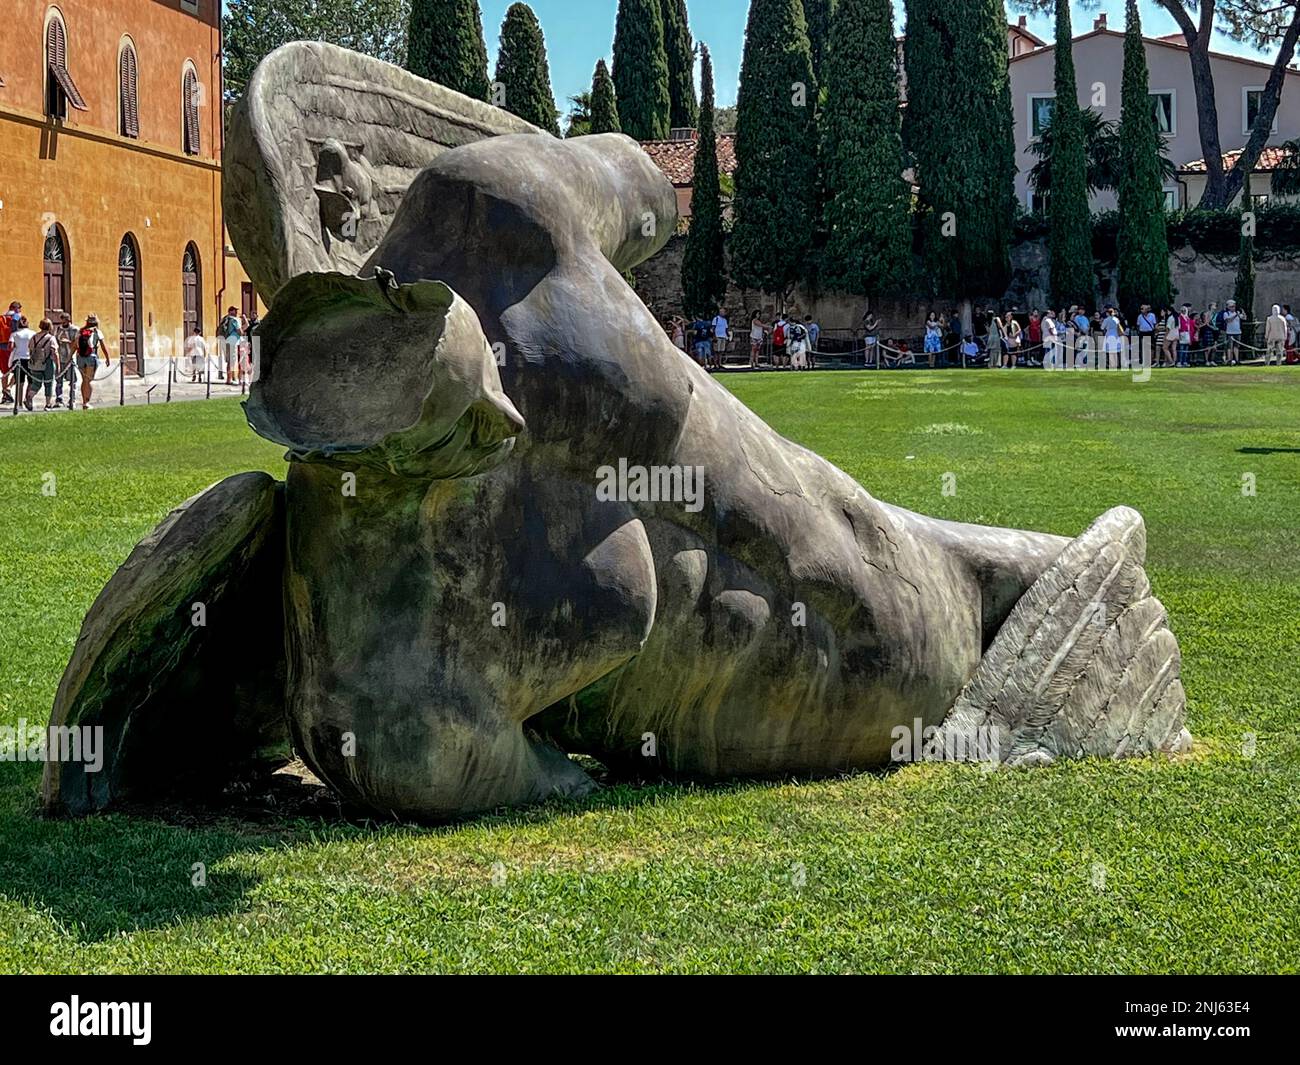 A view of the Fallen Angel sculpture displayed on the grounds of the Piazza dei Miracoli in Pisa, Italy. Stock Photo